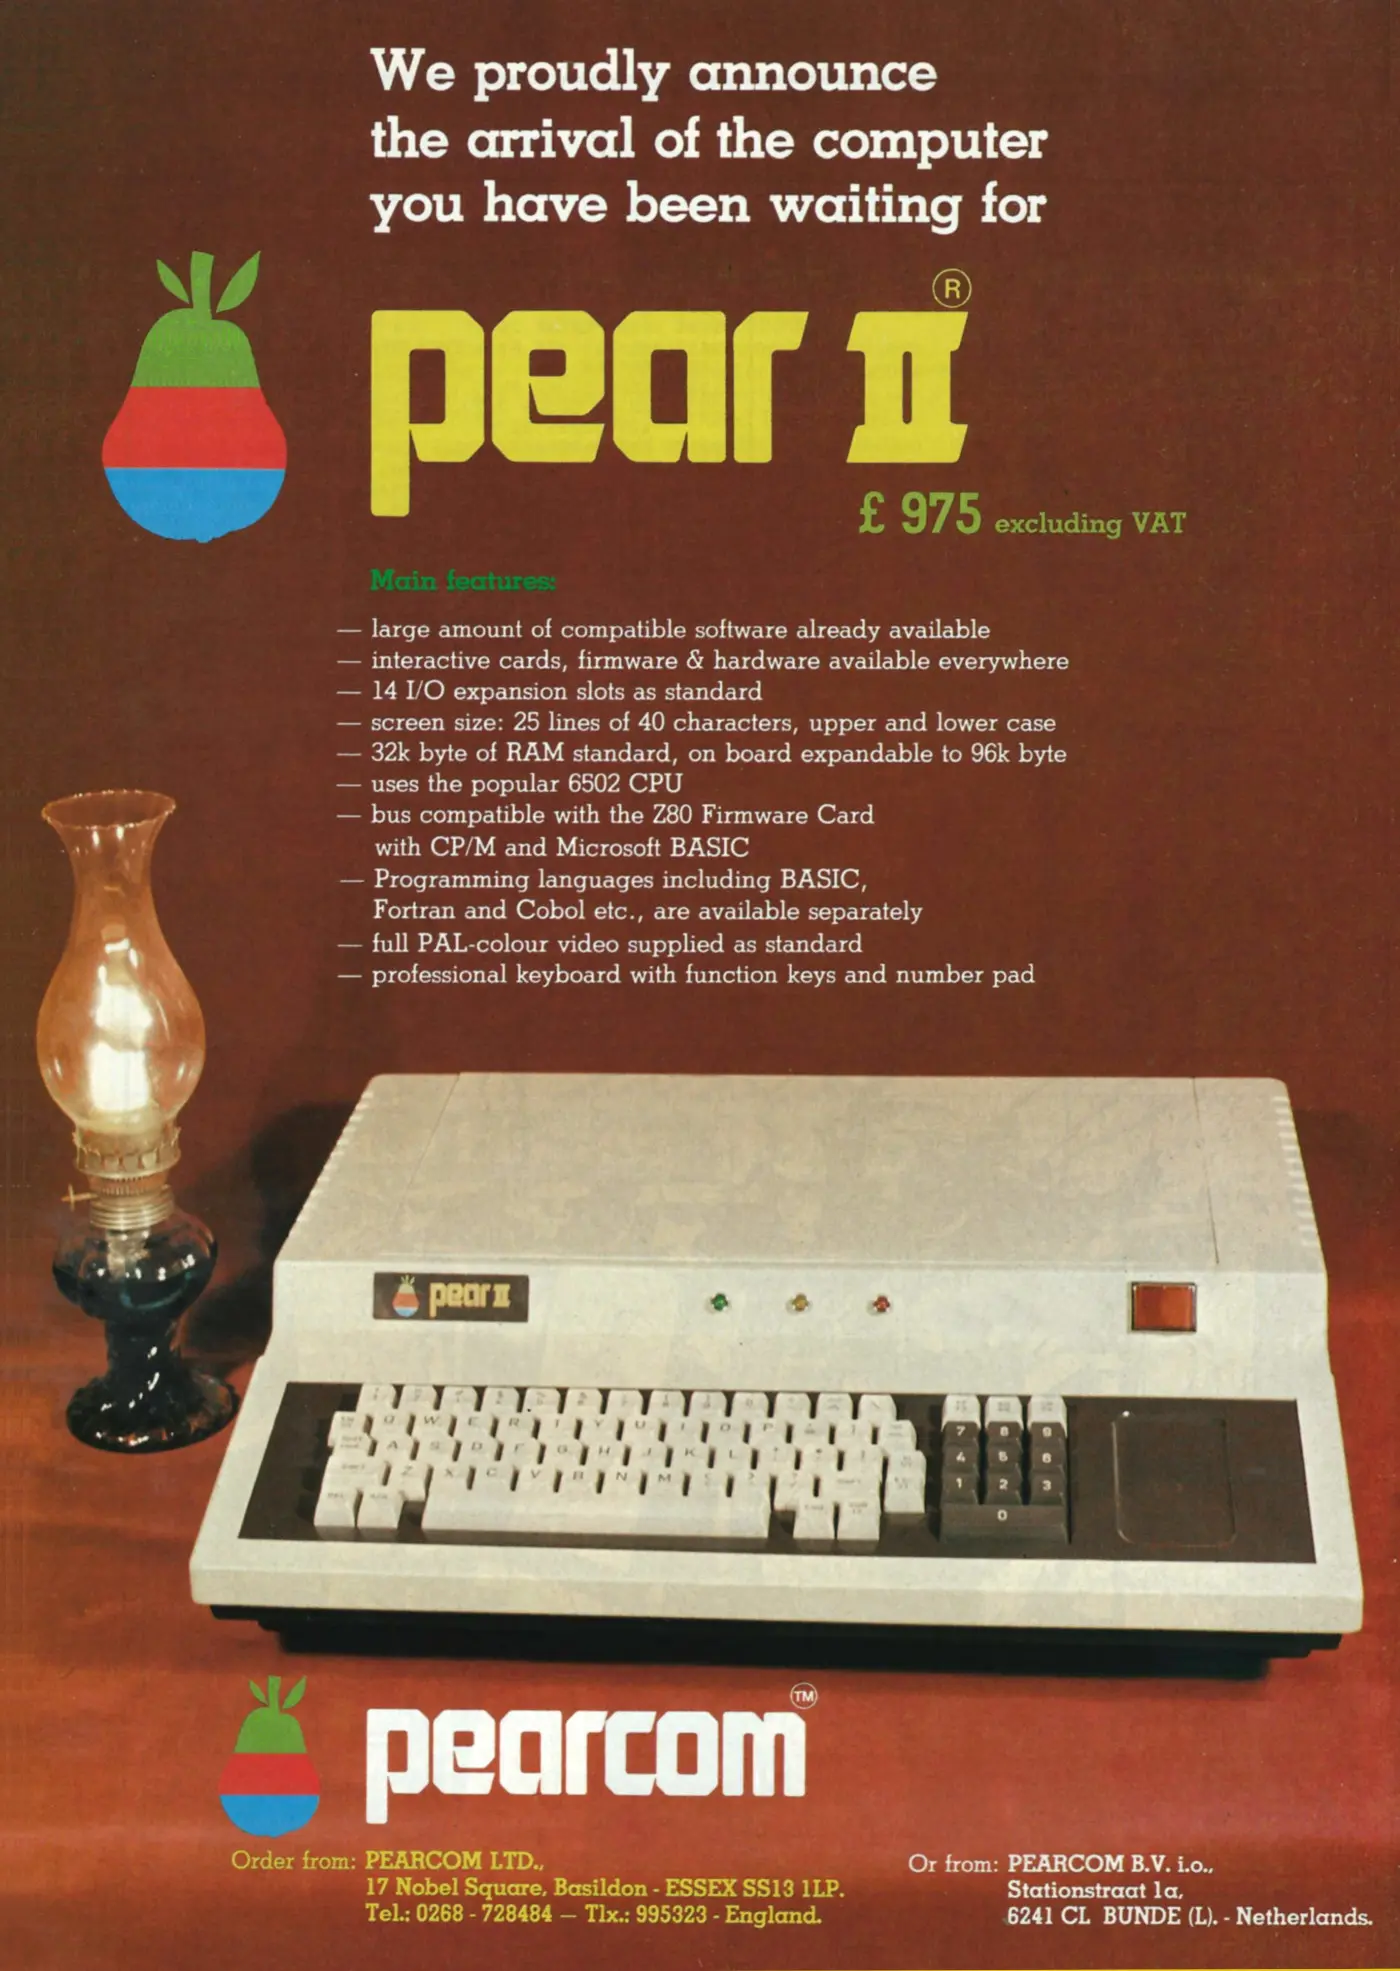 Pearcom Advert: Pear II - we proudly announce the arrival of the computer you have been waiting for, from Computing Today, September 1981